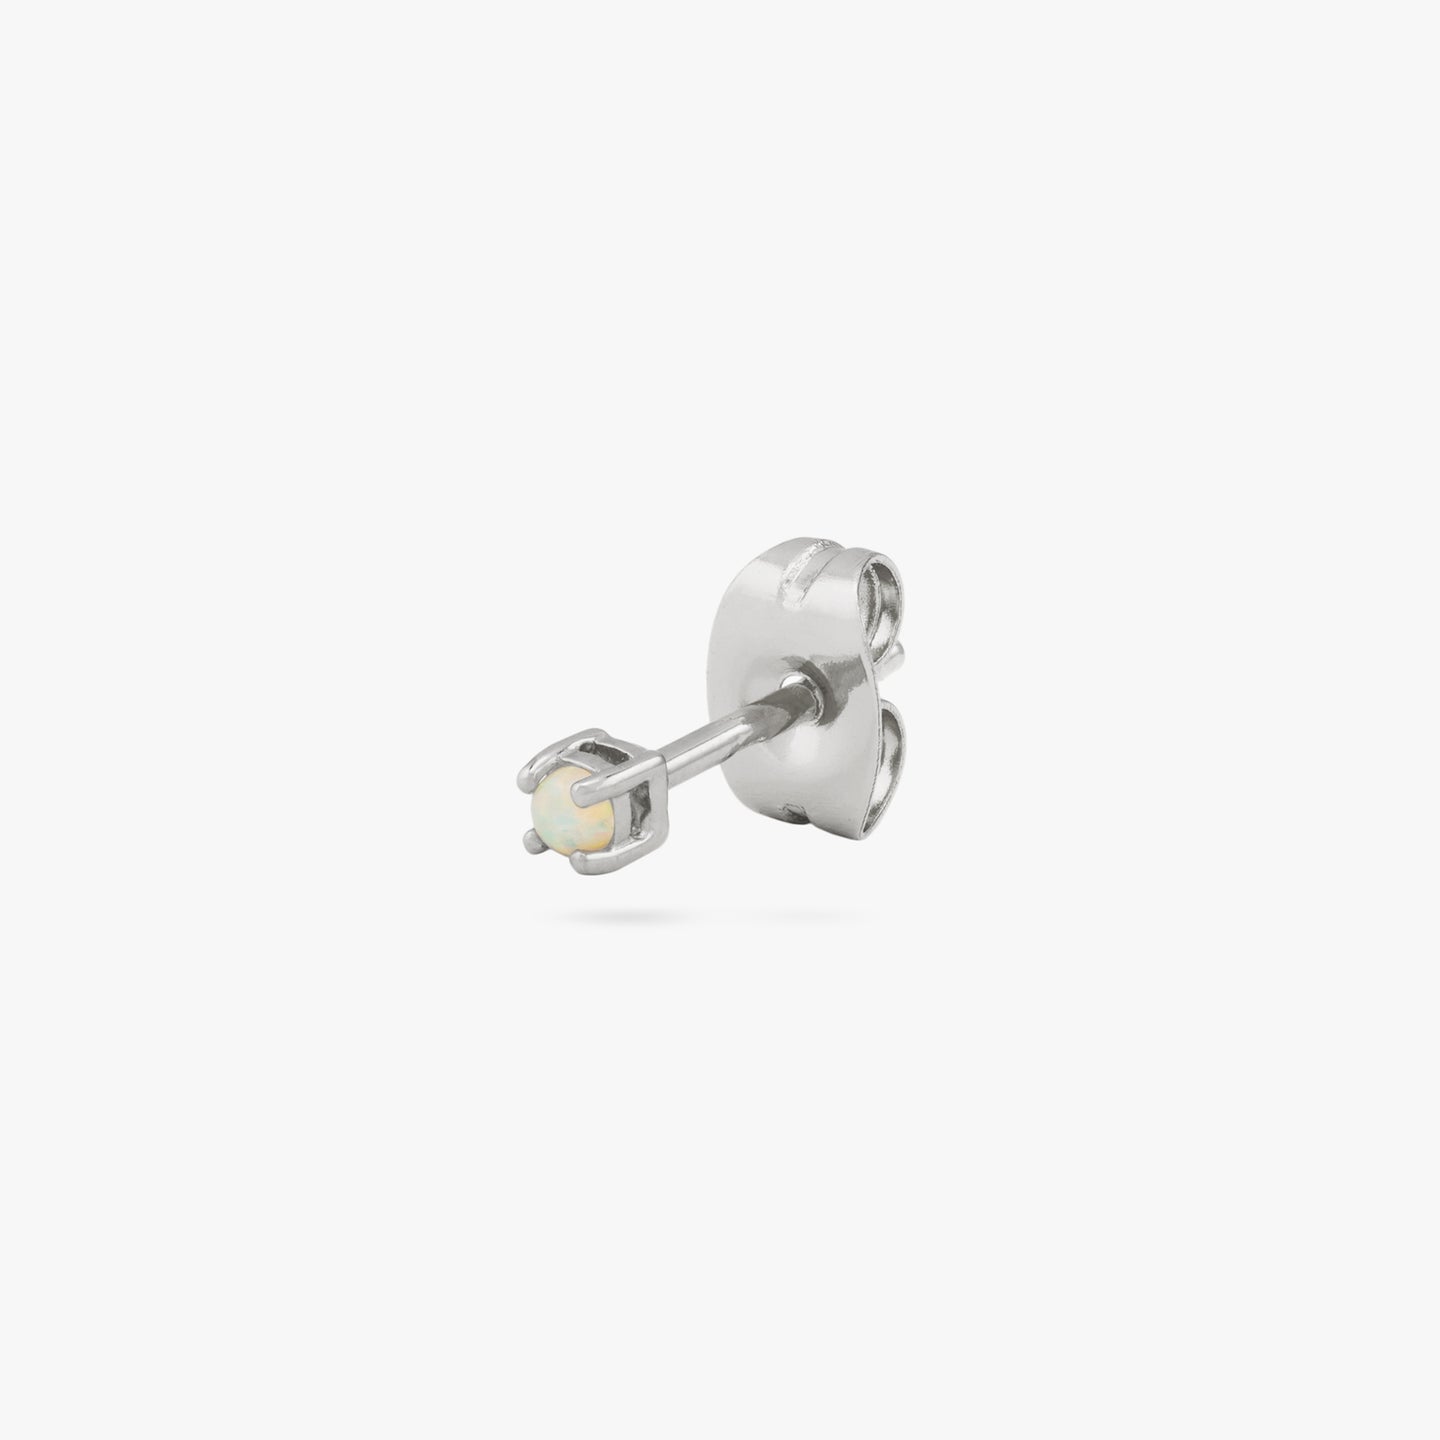 This is a small silver stud with an opal color:null|silver/opal